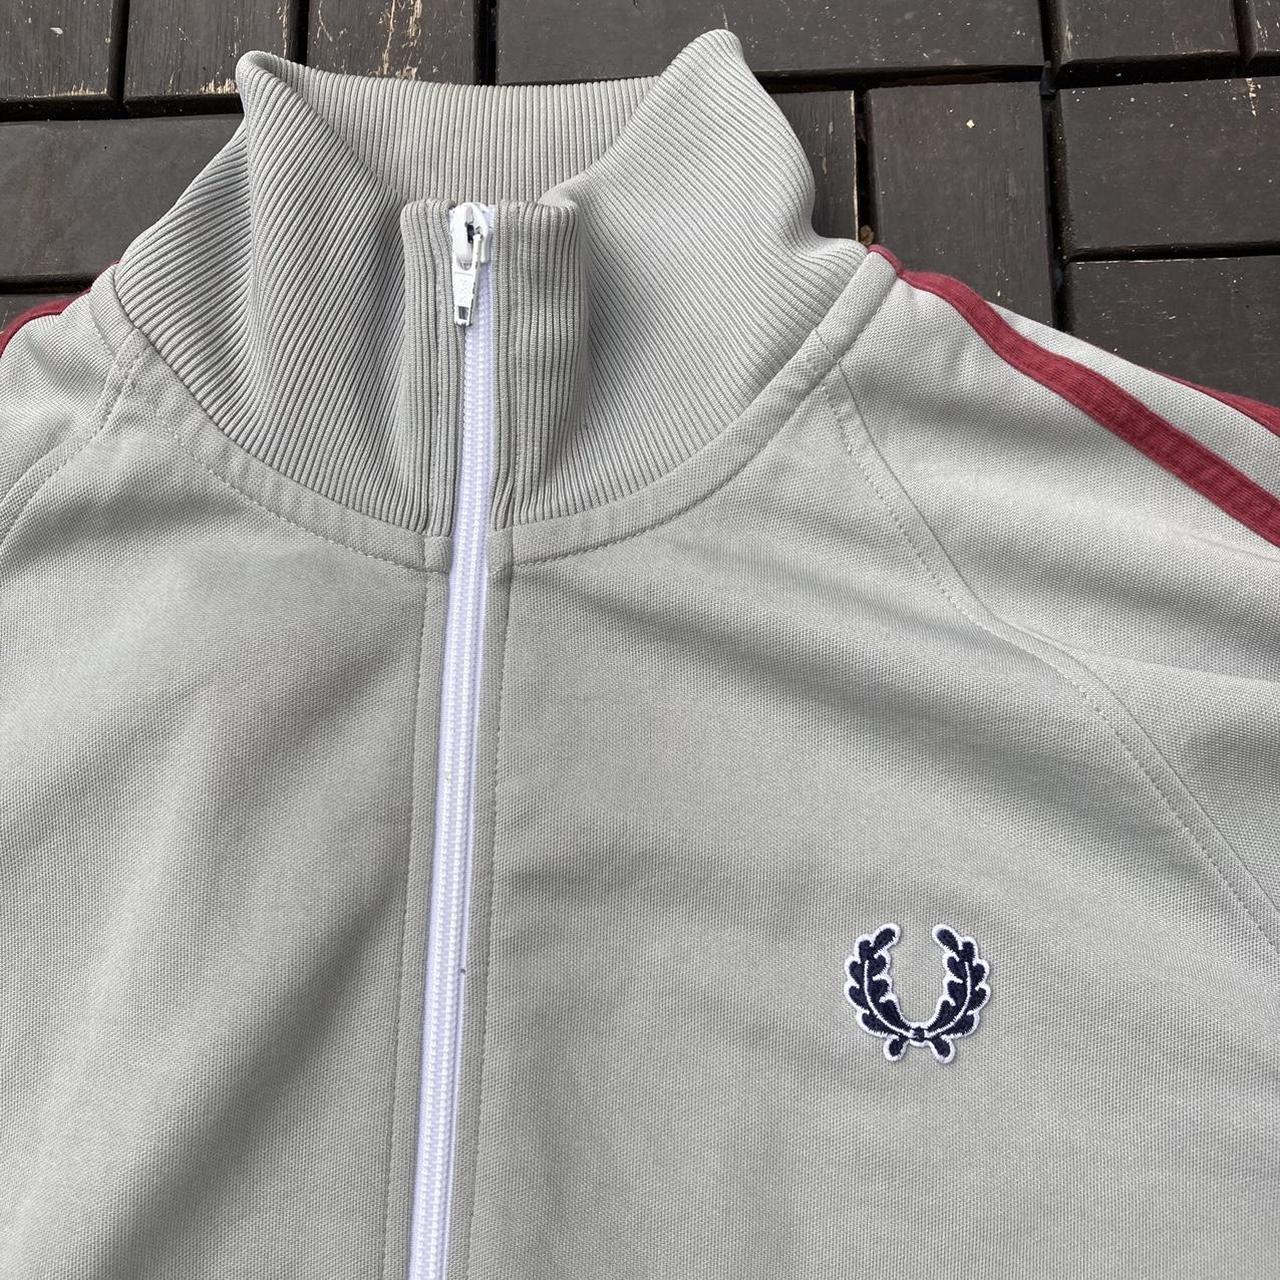 Vintage Fred Perry Tracksuit Top Size M/L Good... - Depop